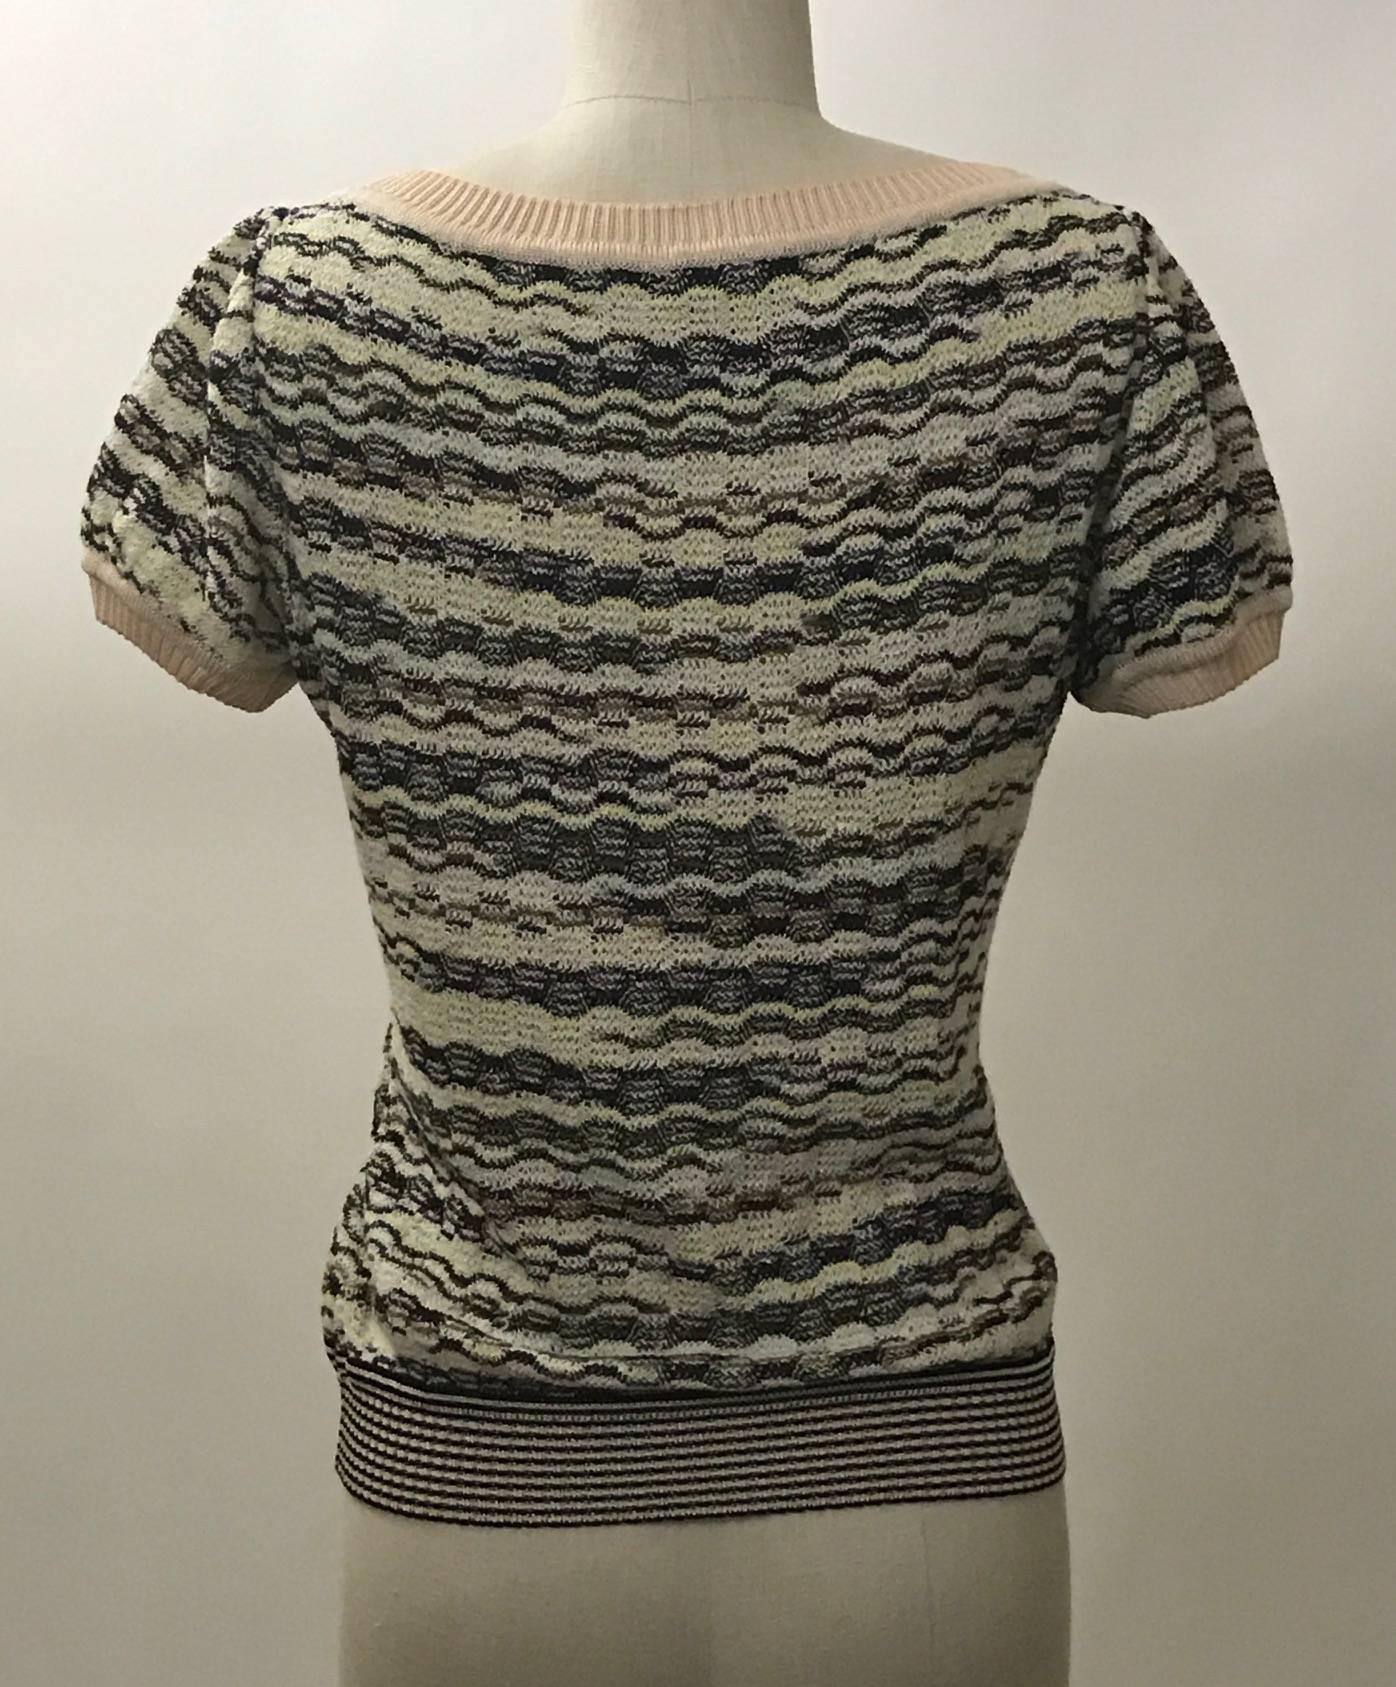 Missoni fruit sweater from the 2005 'Collectable' collection. Embroidered and beaded fruits adorn the front of this classic Missoni pattern knit sweater. Short sleeves, deep v neck, rib knit trim at neck and sleeves.

Marked 88/500.

60% rayon,